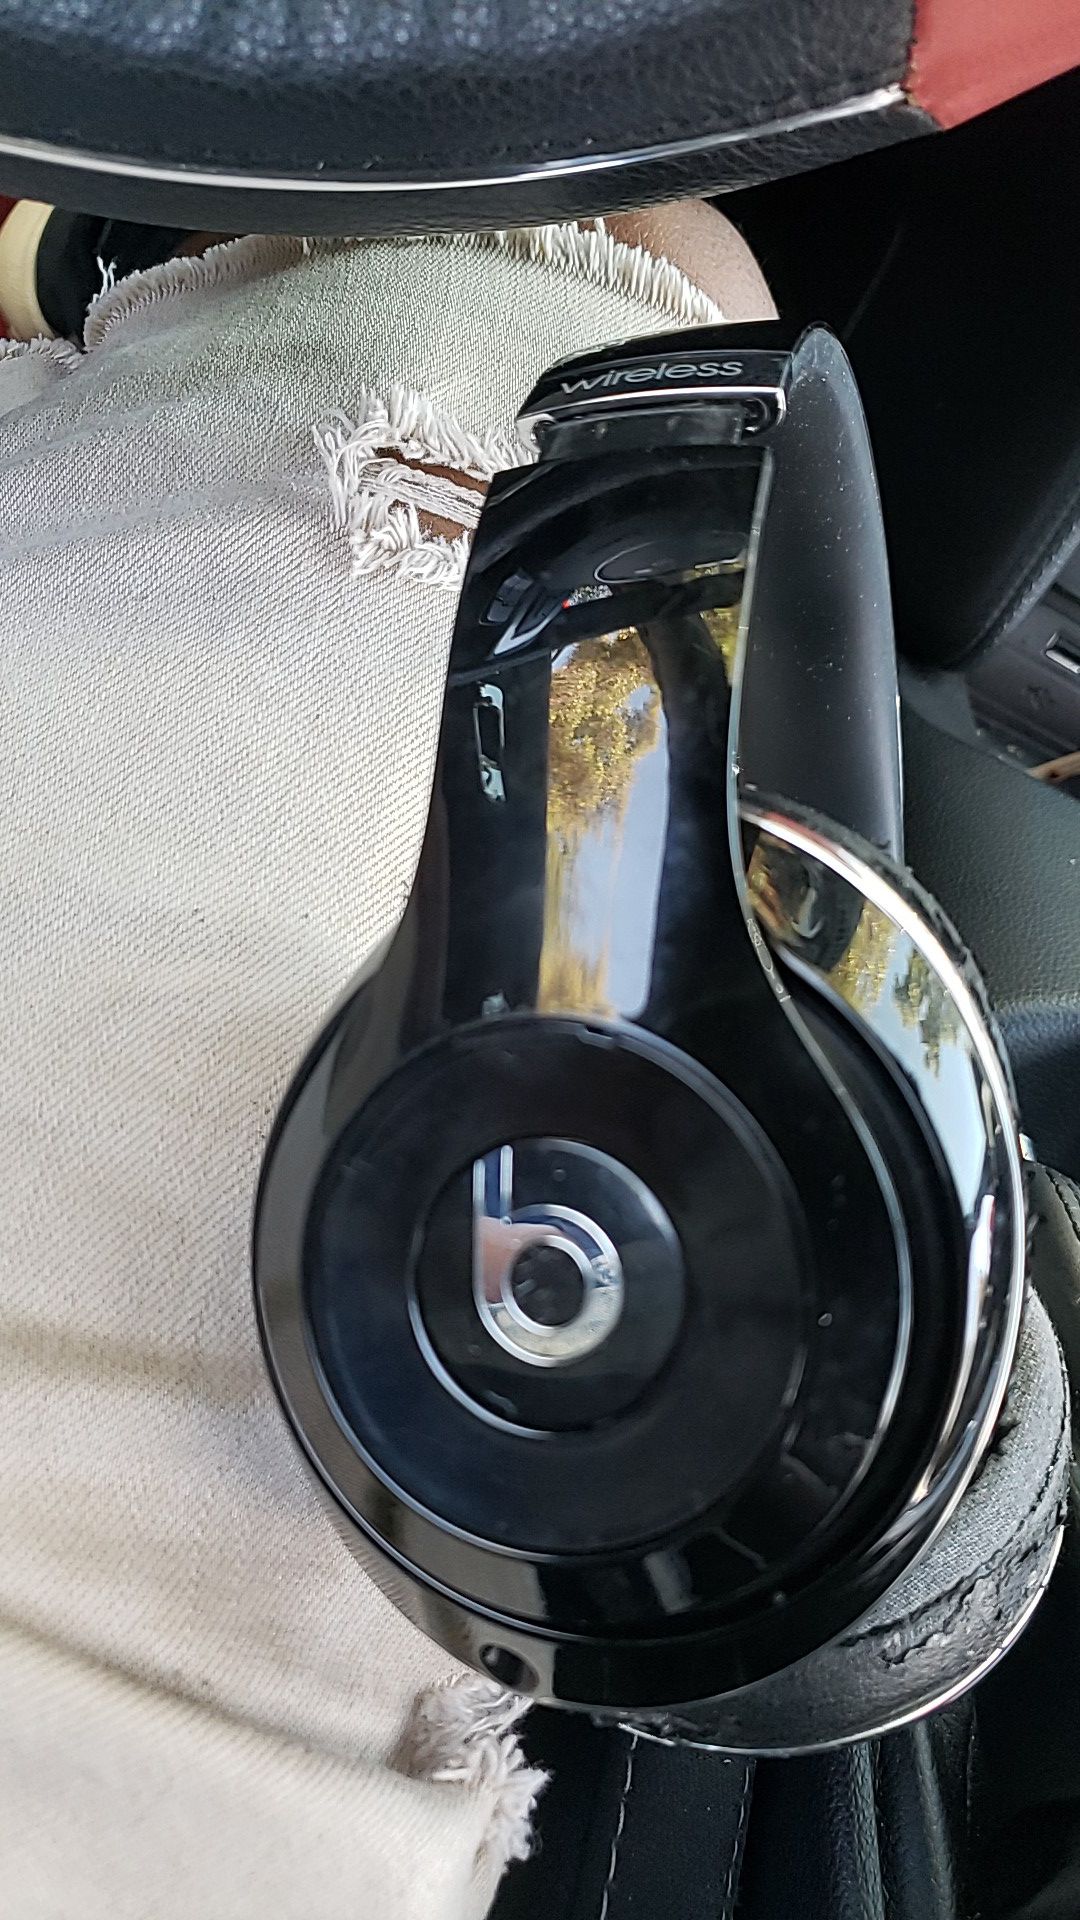 used wireless beats works perfect ...i got new ones